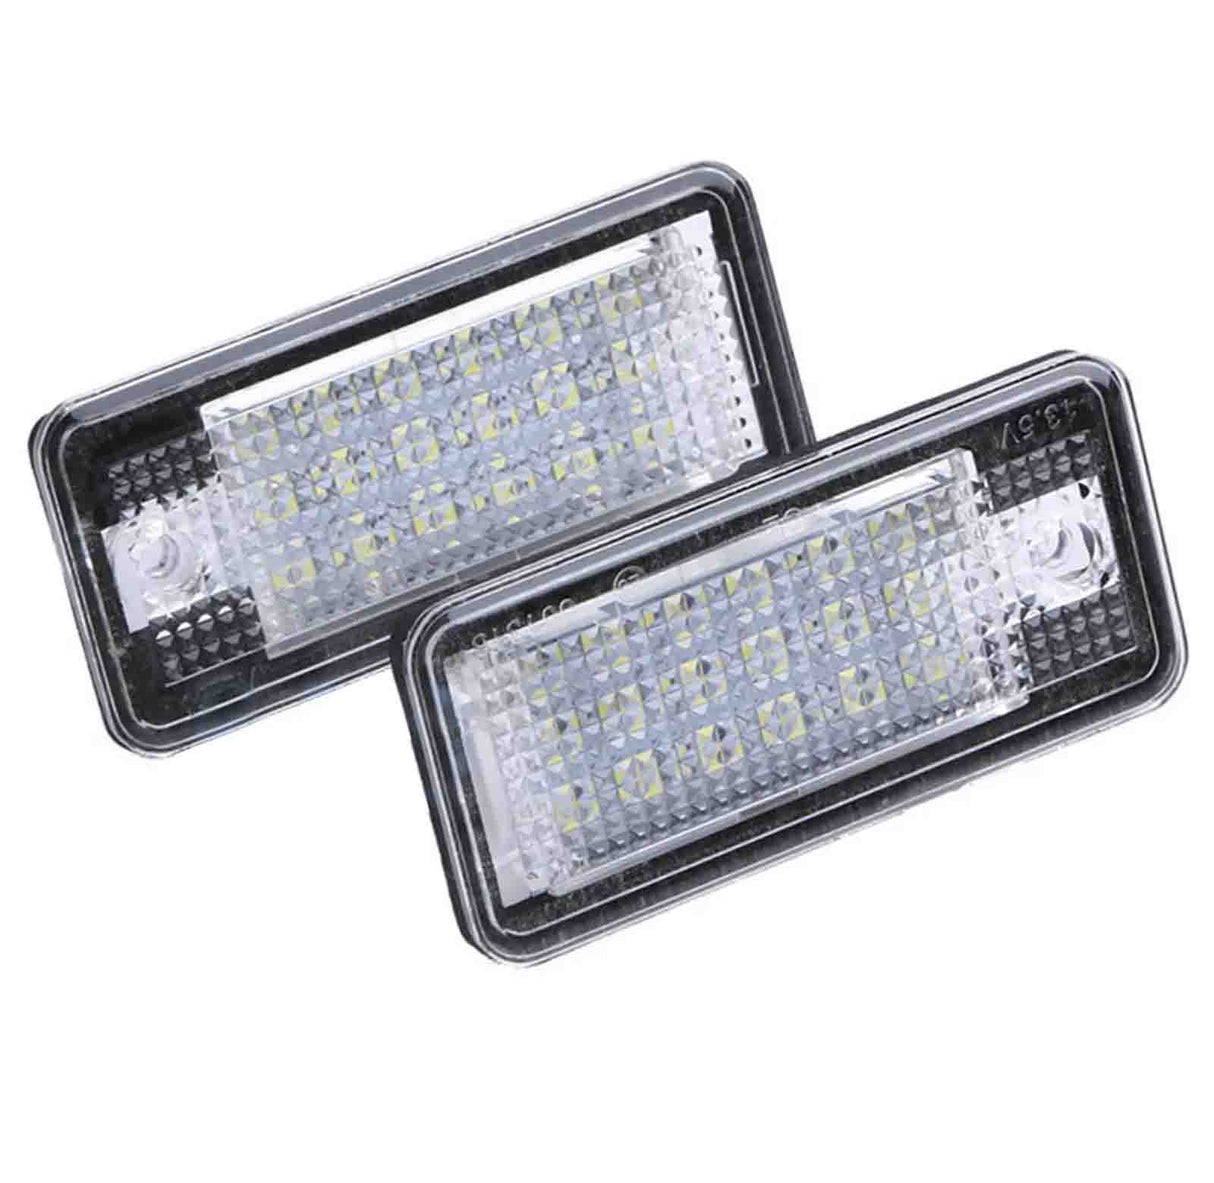 Audi LED Licence Number Plate Light A3 8P - Carbon Accents